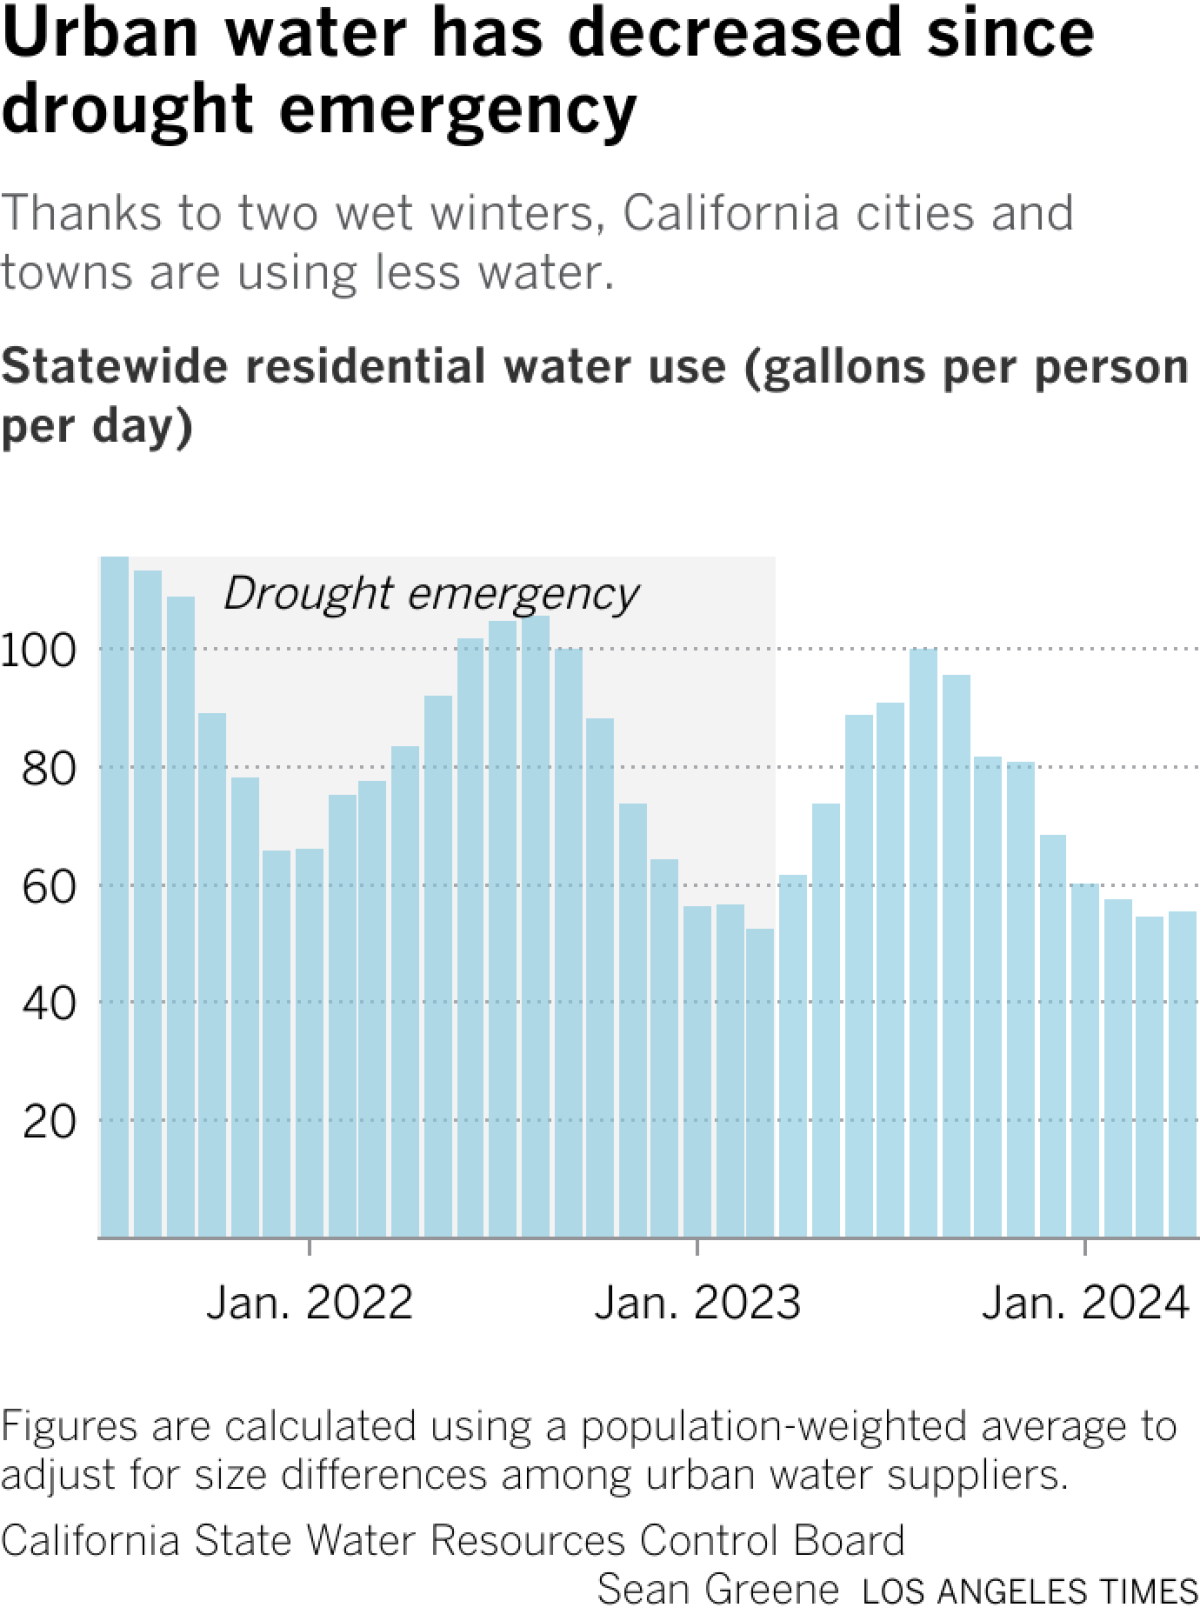 Bar chart shows residential water